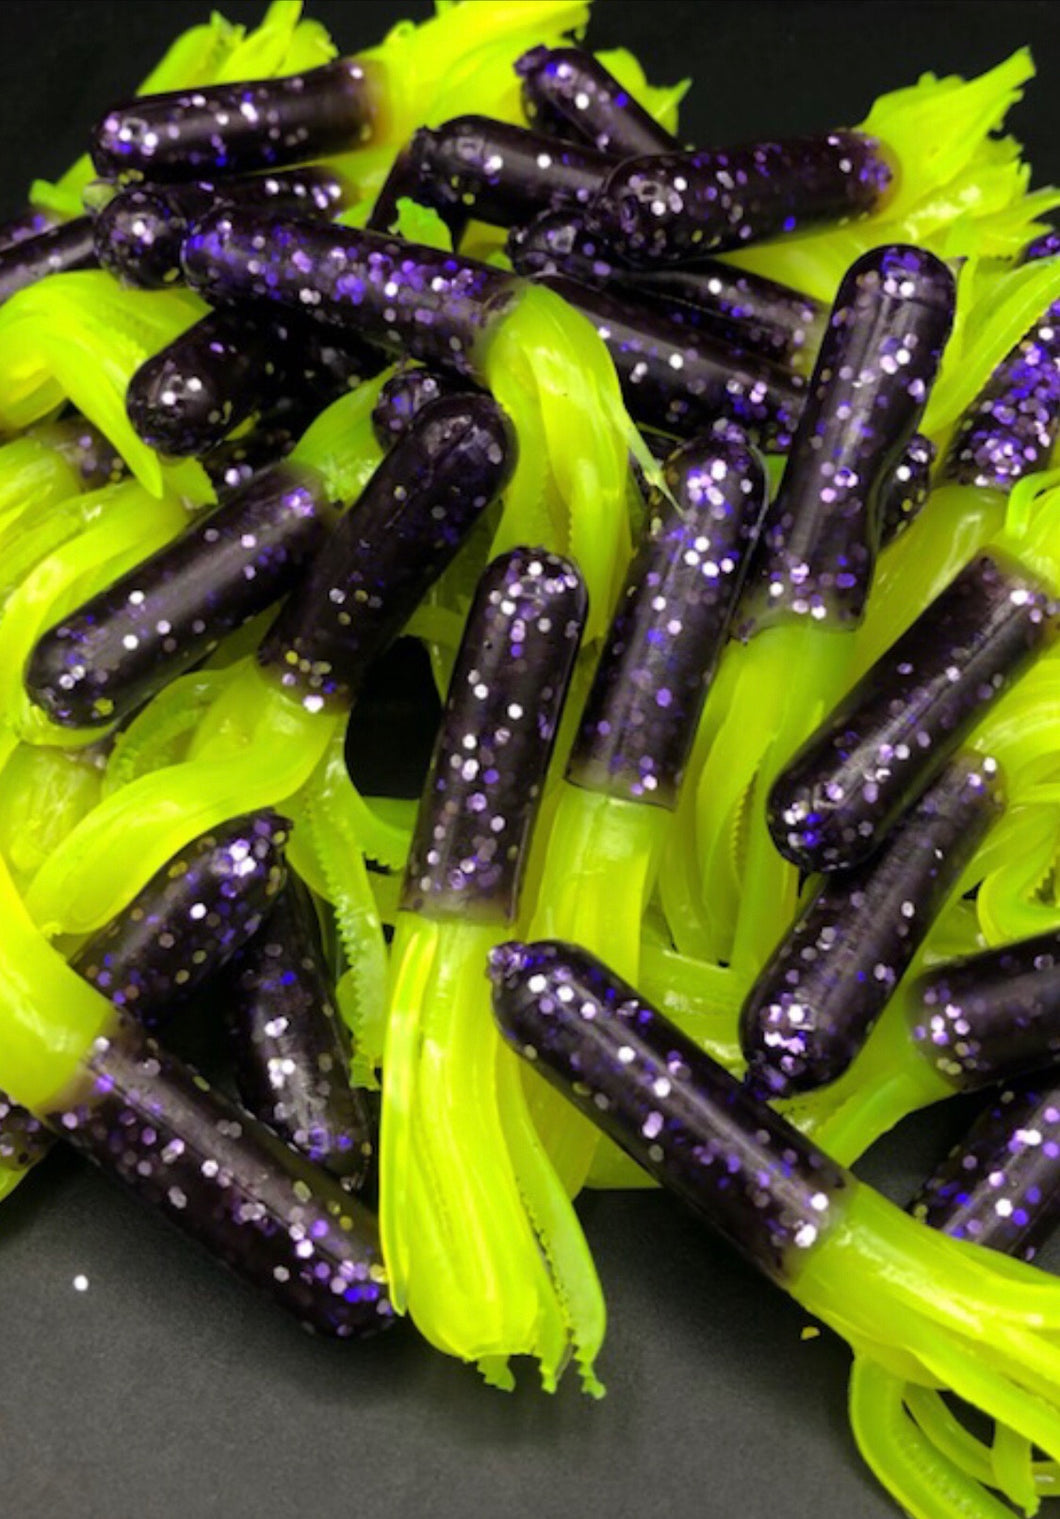 Tuff Bugs - Gum Drop with a touch of Glow - 10/pkg - 2 1/2 inch solid body soft rubber bait